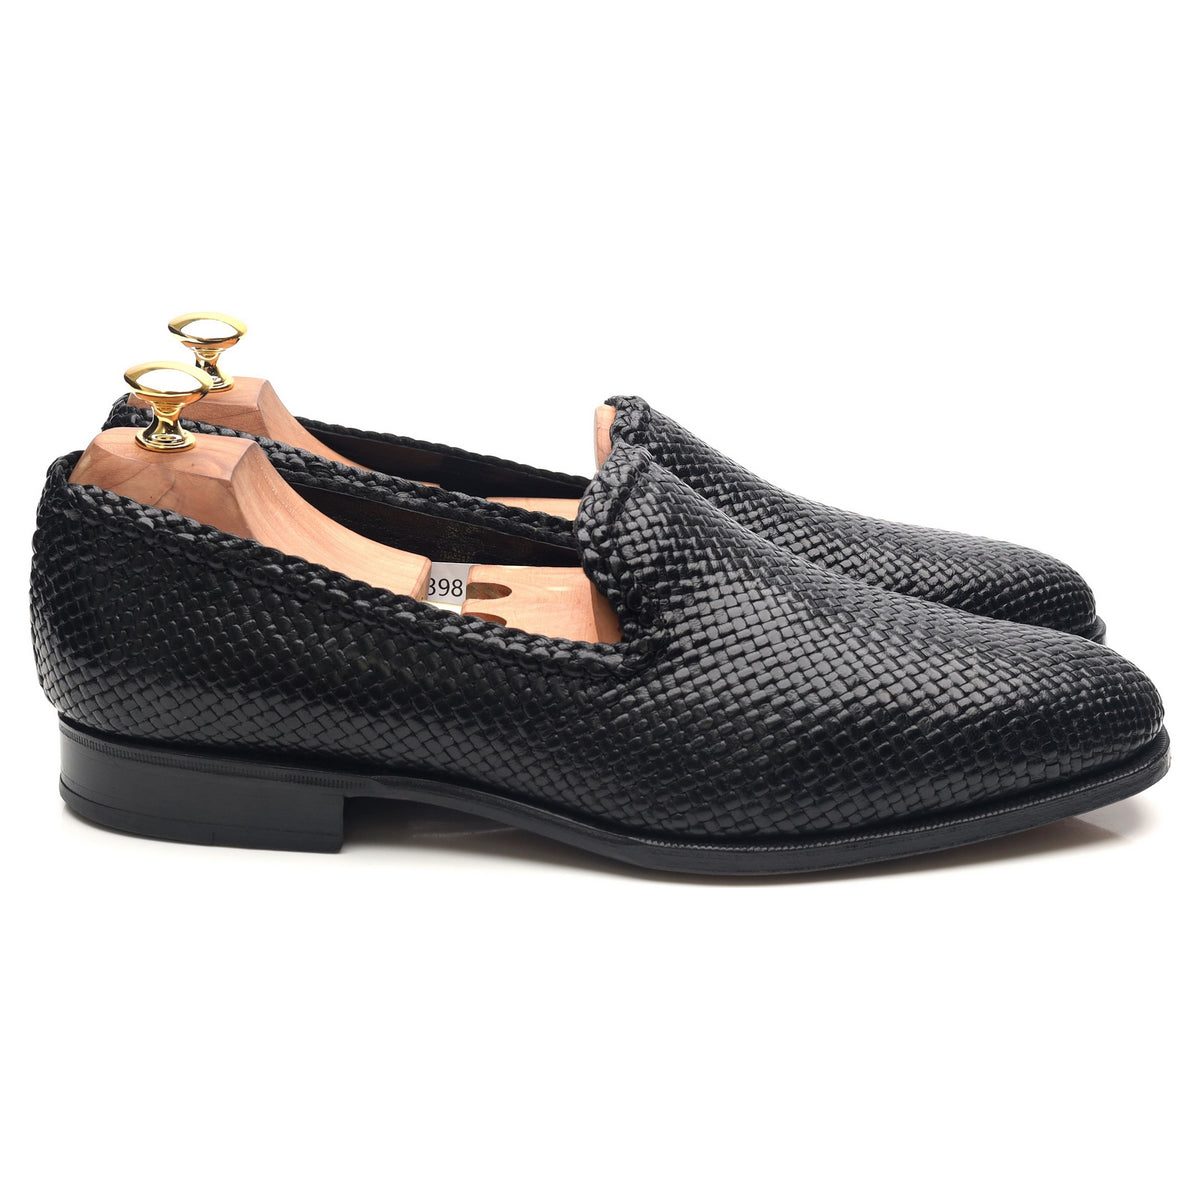 Black Leather Braided Loafers UK 10 EE